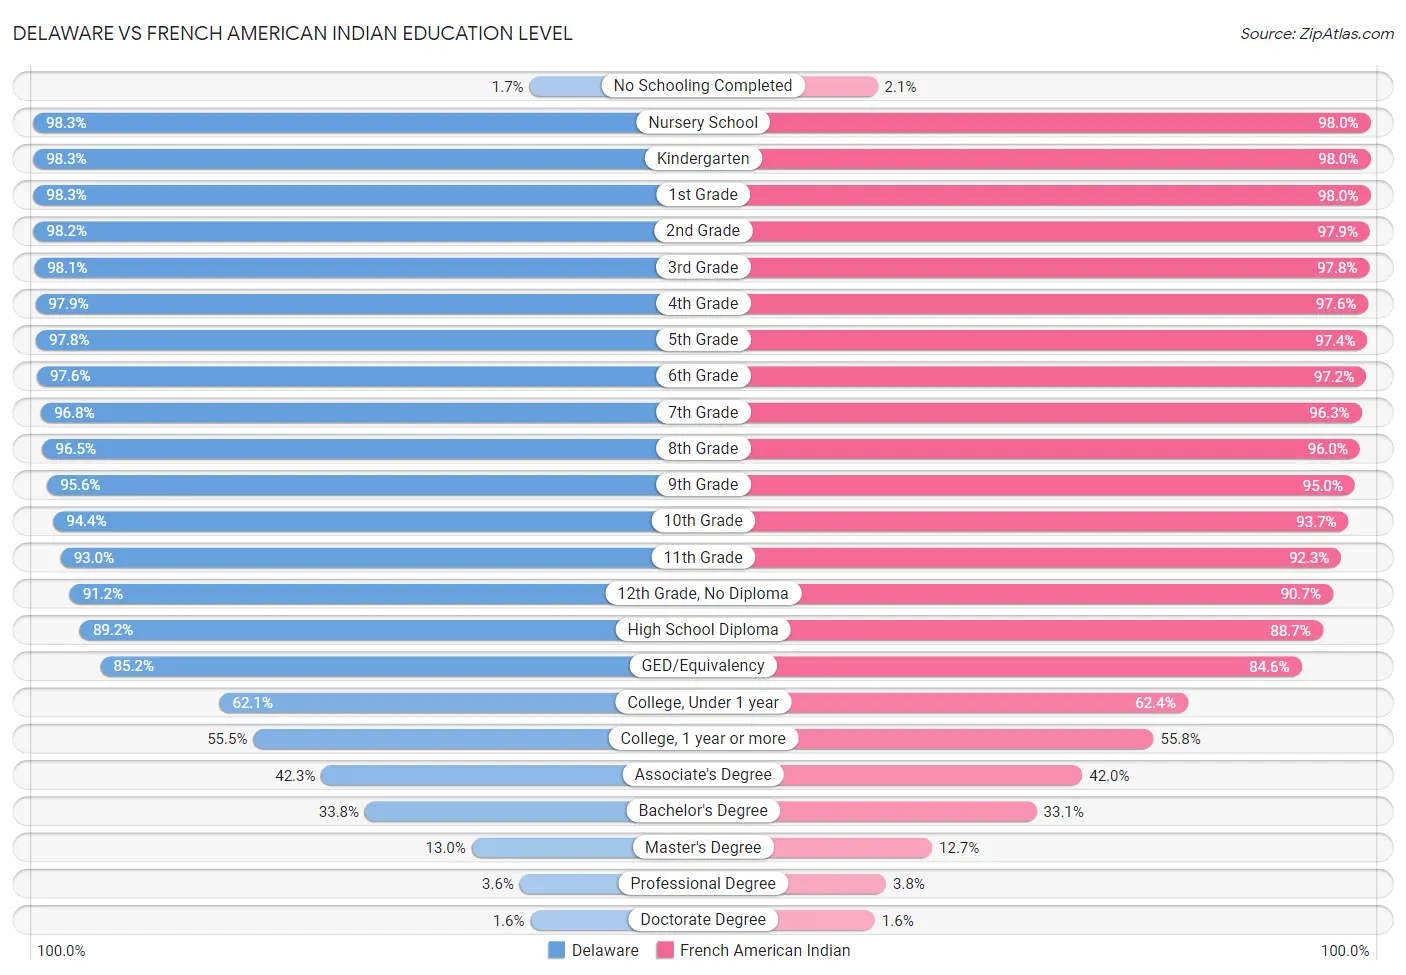 Delaware vs French American Indian Education Level